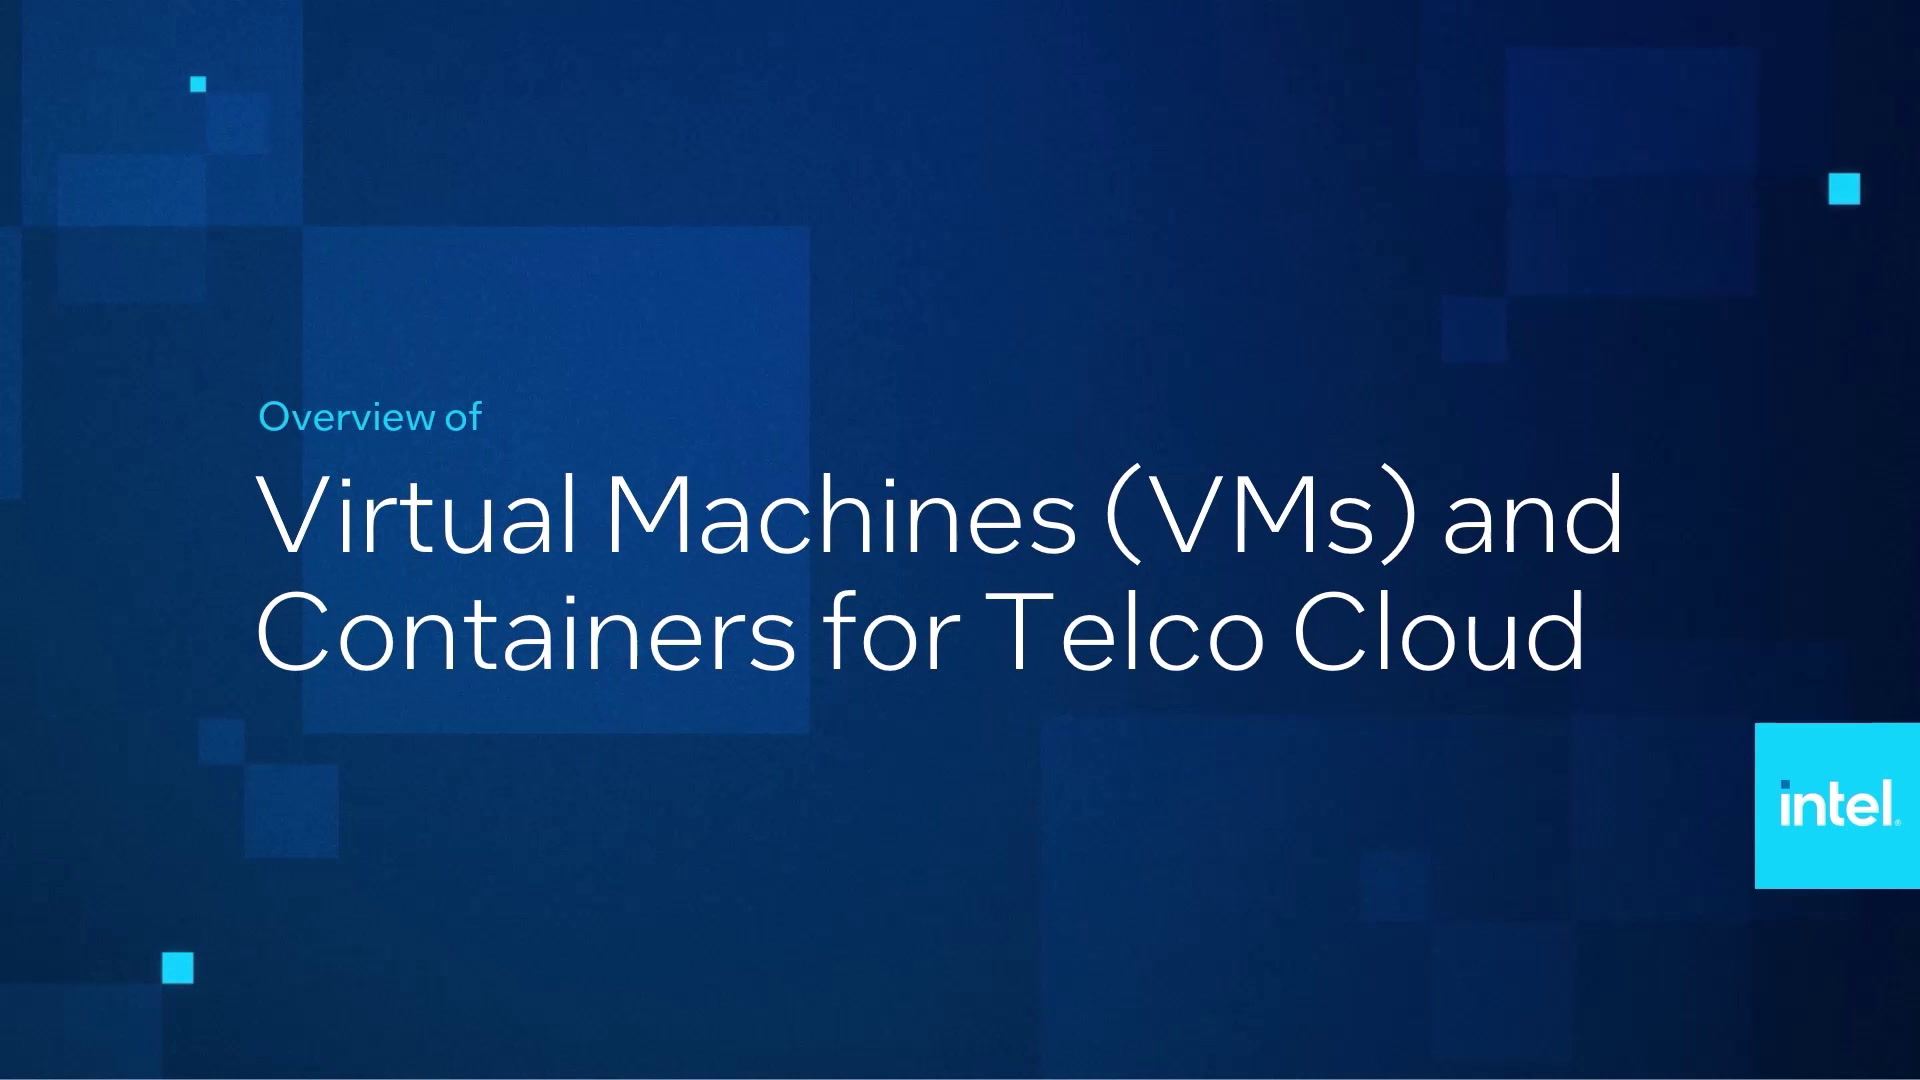  Overview of Virtual Machines (VMs) and Containers for Telco Cloud 